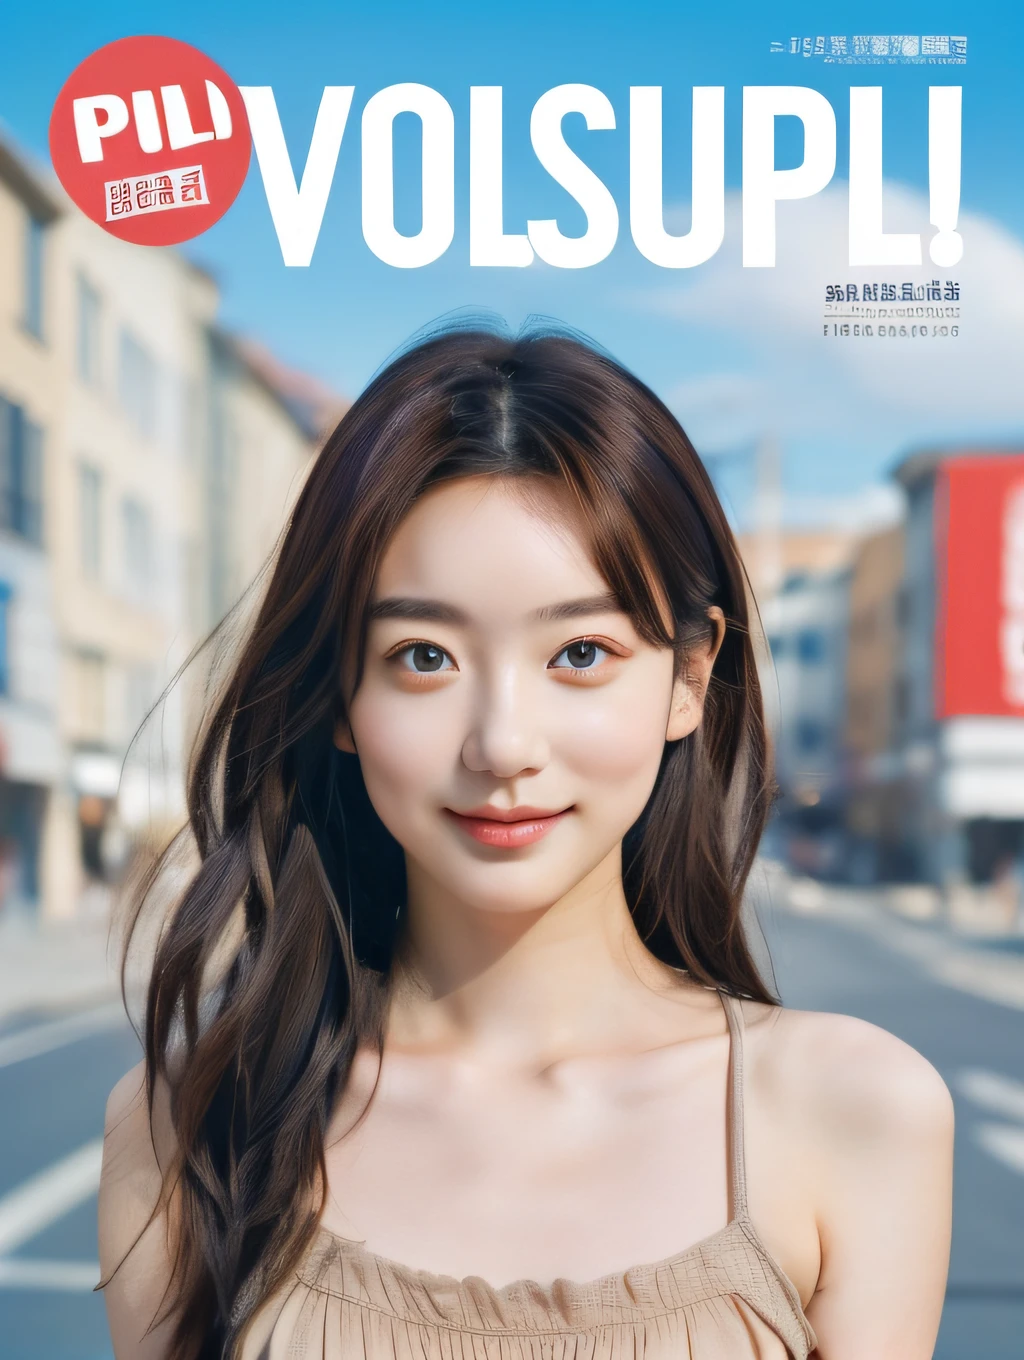 JPNIDOL、1girl in、Idol magazine cover、Beautiful model with brown hair at 26 years old、​masterpiece、hightquality、looking at viewert、blue open sky、A city scape、in 8K、masuter piece